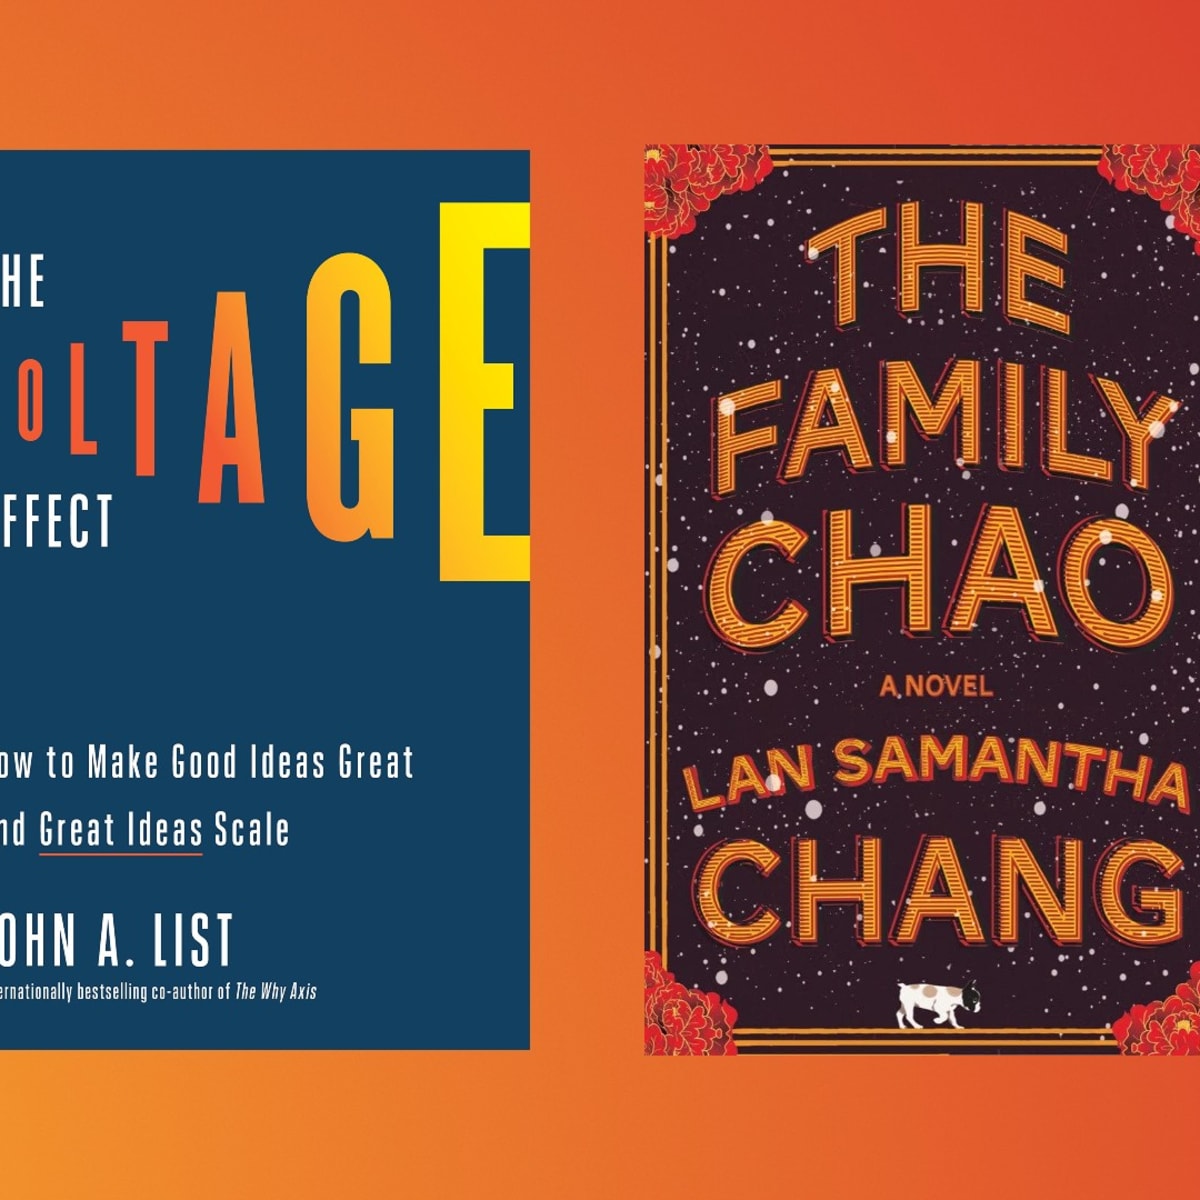 Stream episode The Family Chao: Lan Samantha Chang on How to